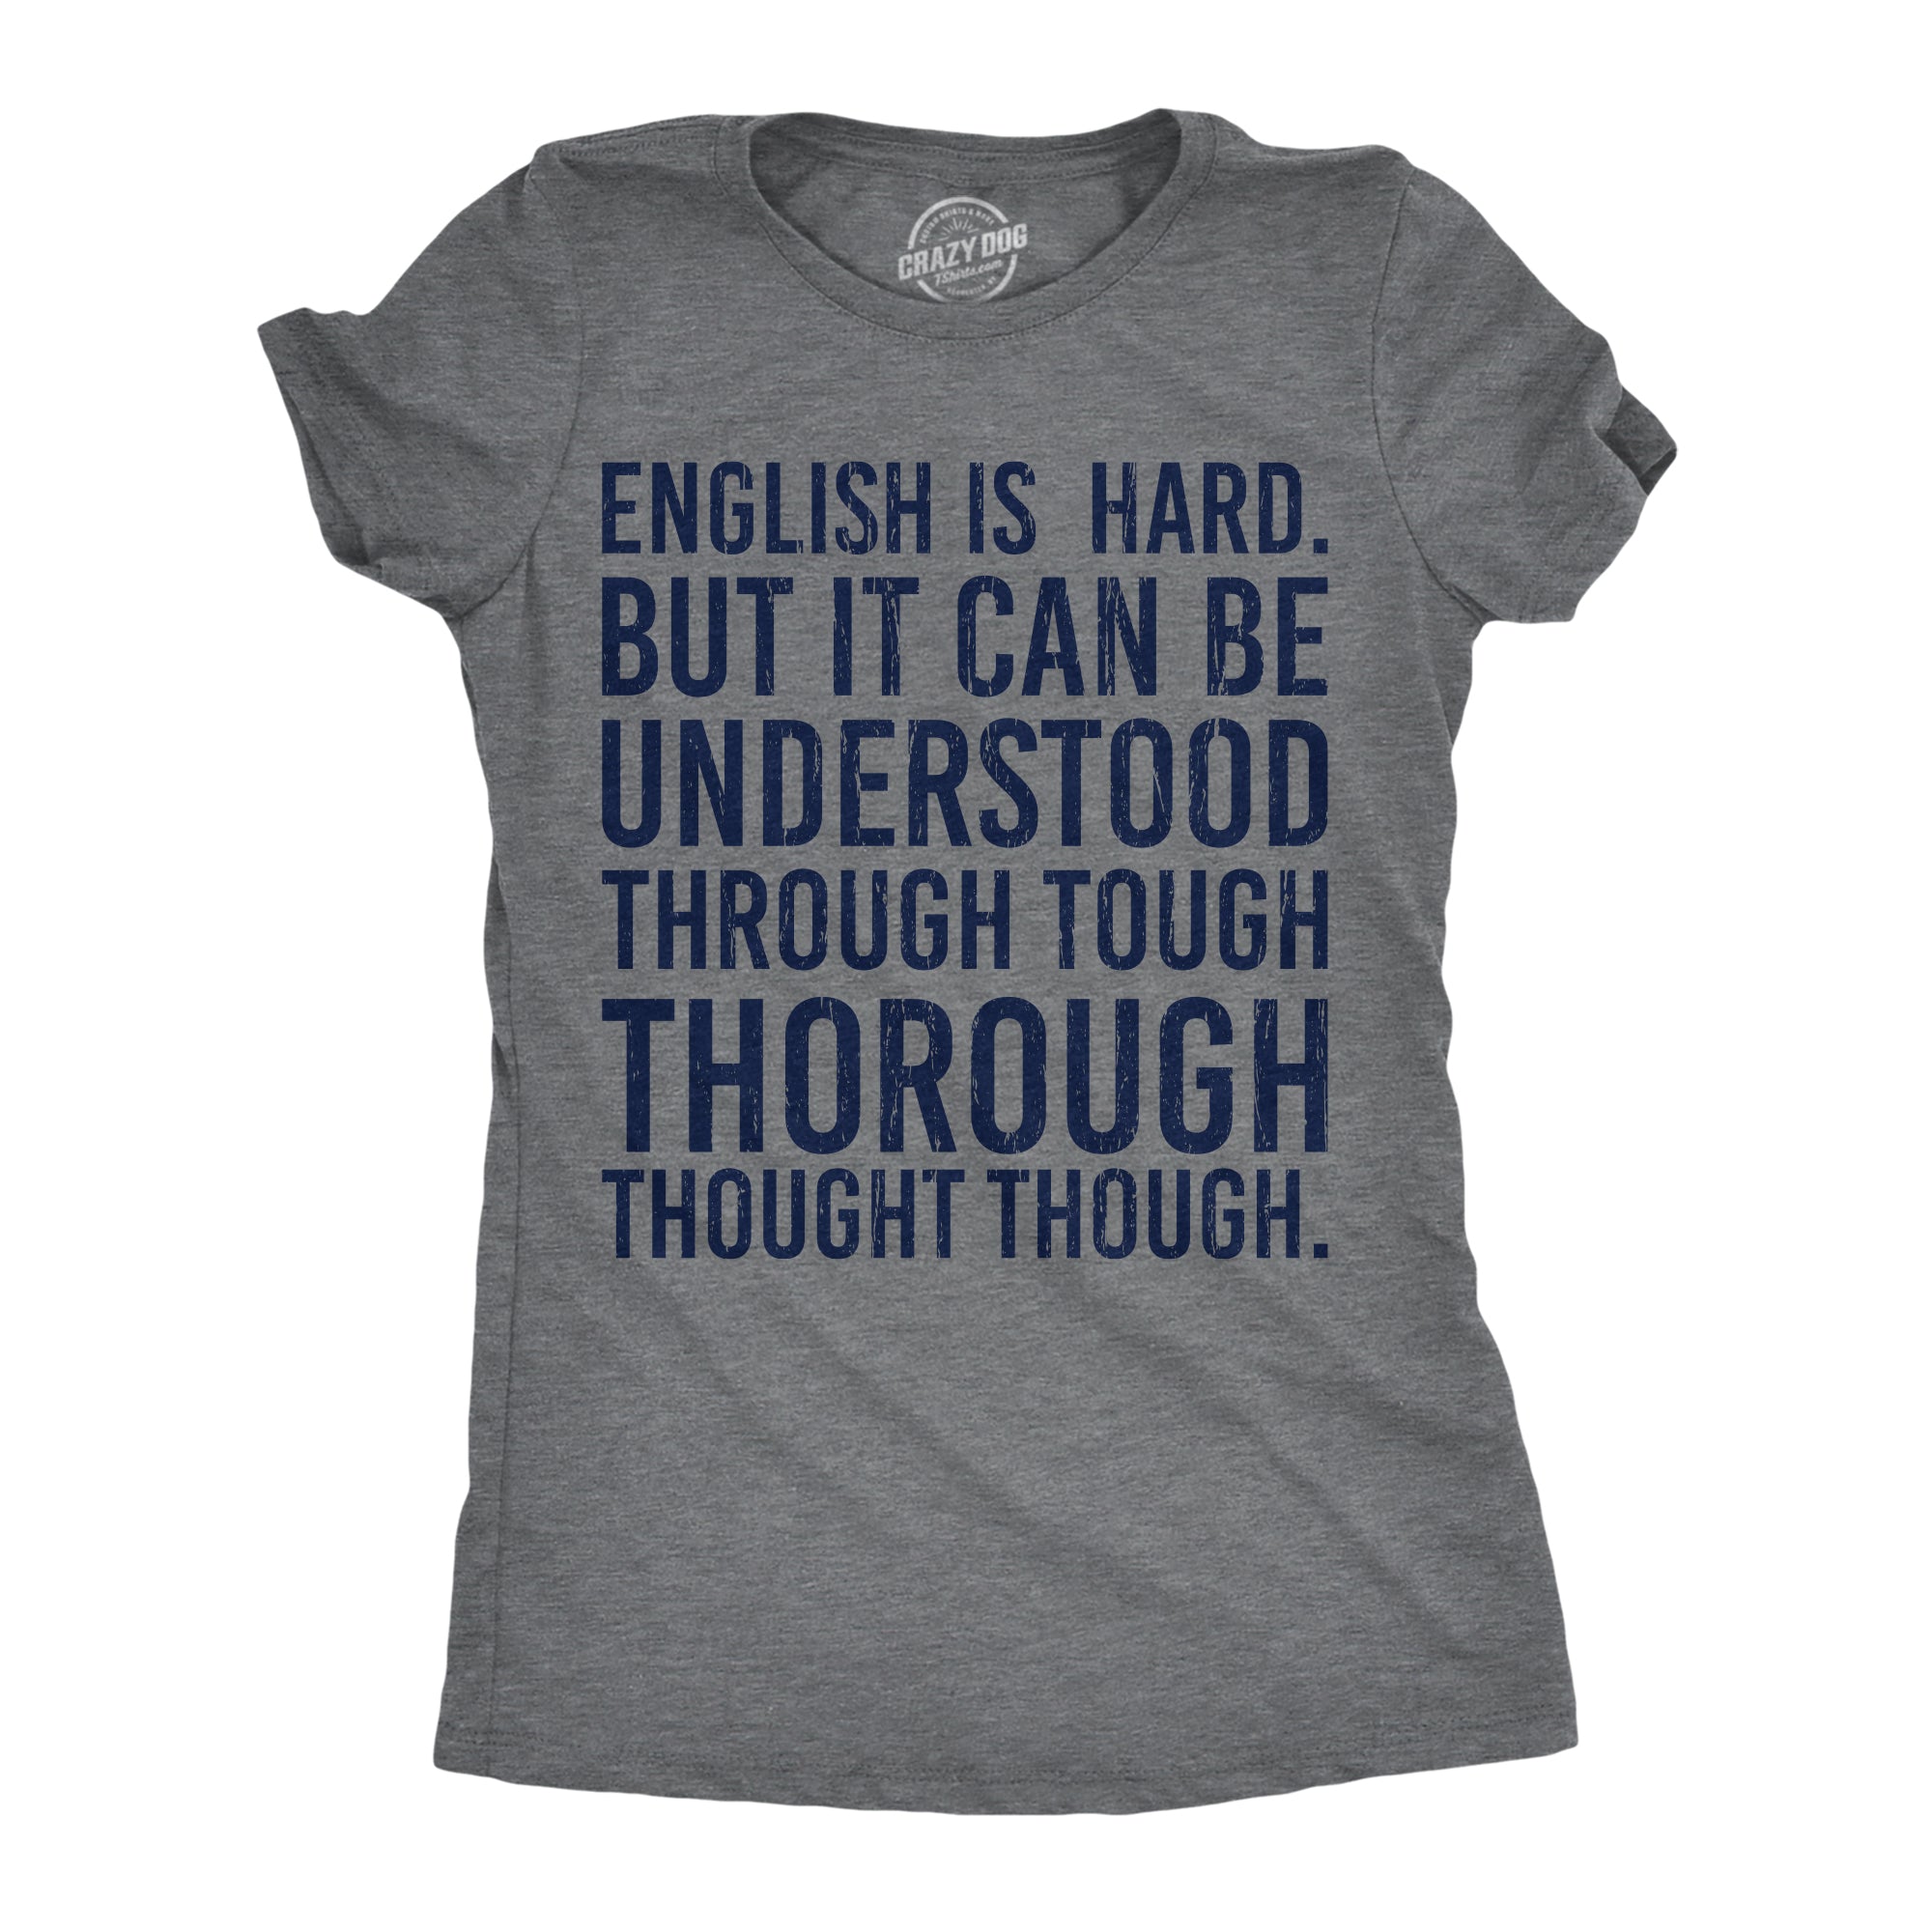 Funny Dark Heather Grey - English Is Hard English Is Hard But It Can Be Understood Through Tough Thorough Thought Though Womens T Shirt Nerdy sarcastic Tee